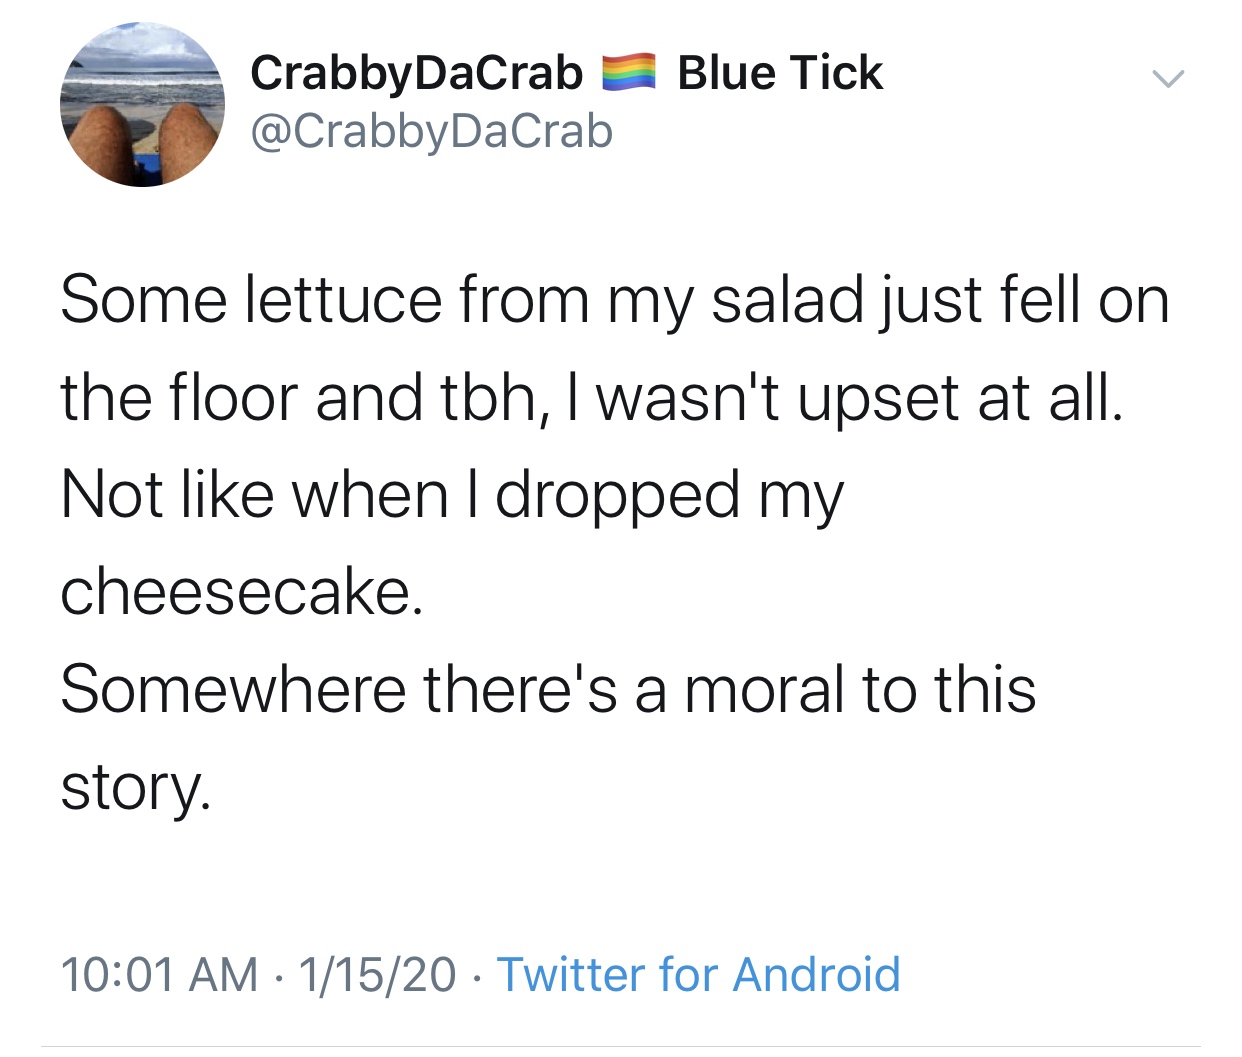 quotes - Blue Tick CrabbyDaCrab Some lettuce from my salad just fell on the floor and tbh, I wasn't upset at all. Not when I dropped my cheesecake. Somewhere there's a moral to this story. 11520 Twitter for Android